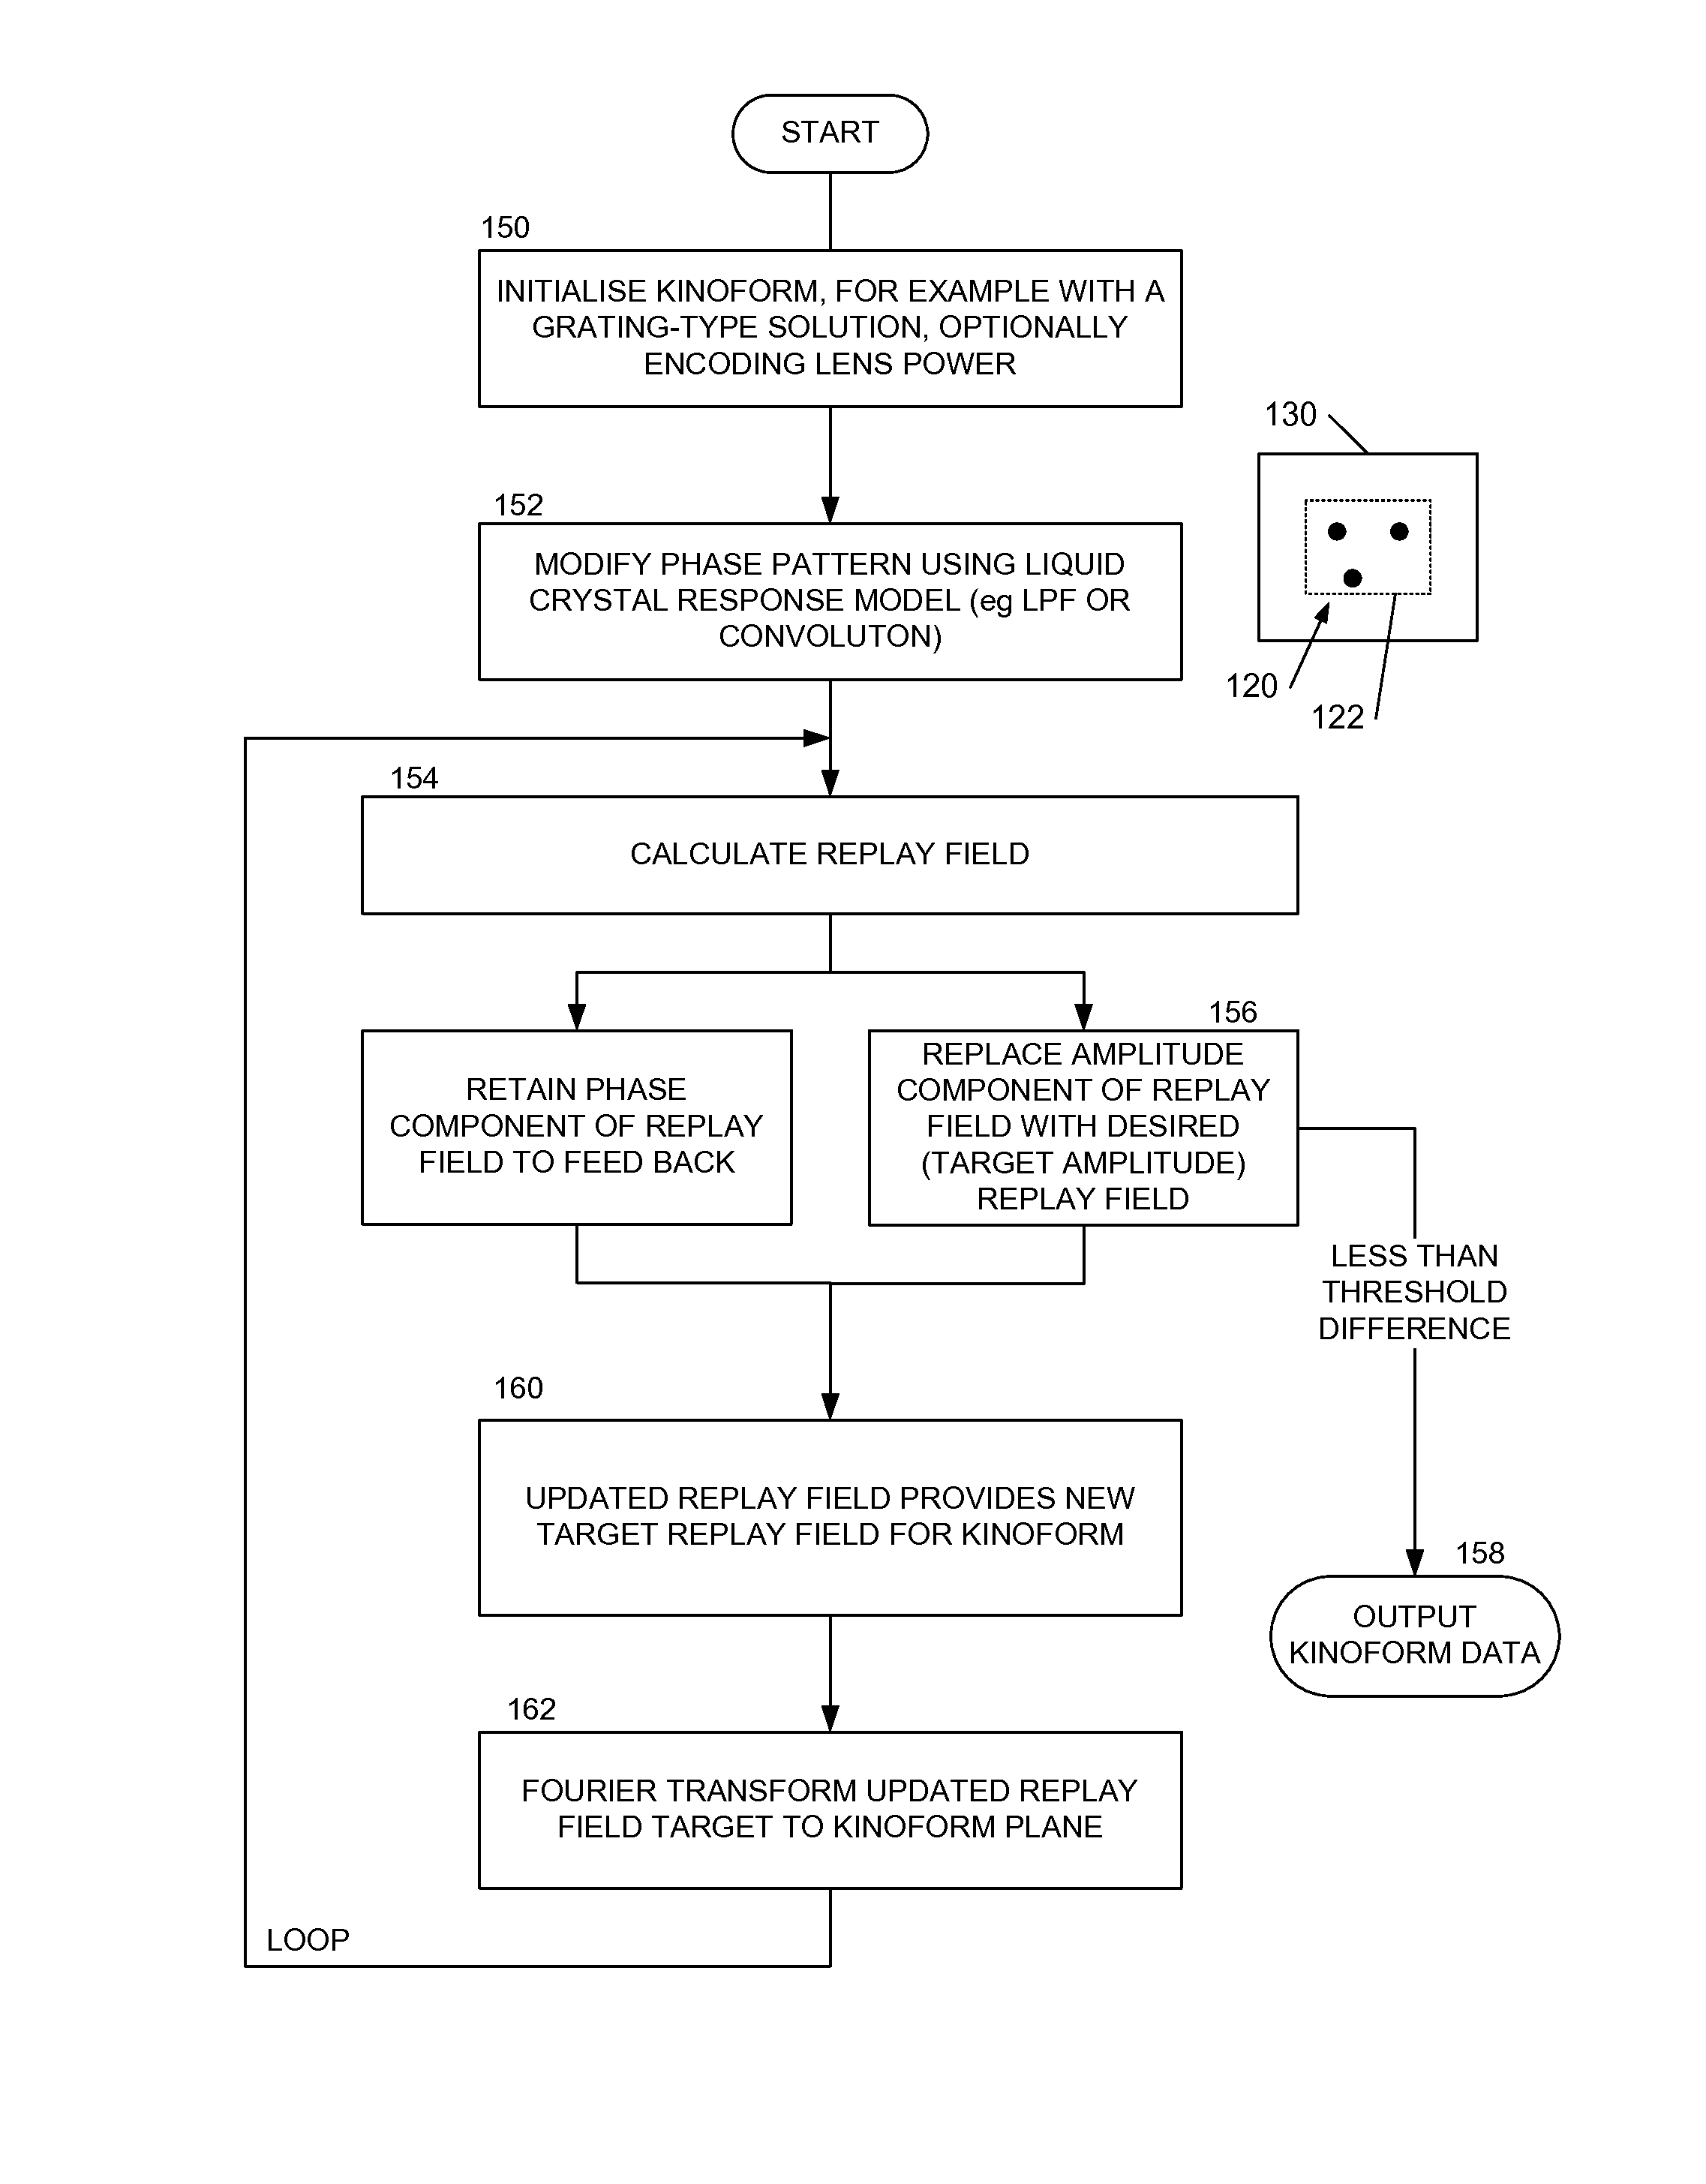 Apparatus and methods for light beam routing in telecommunication